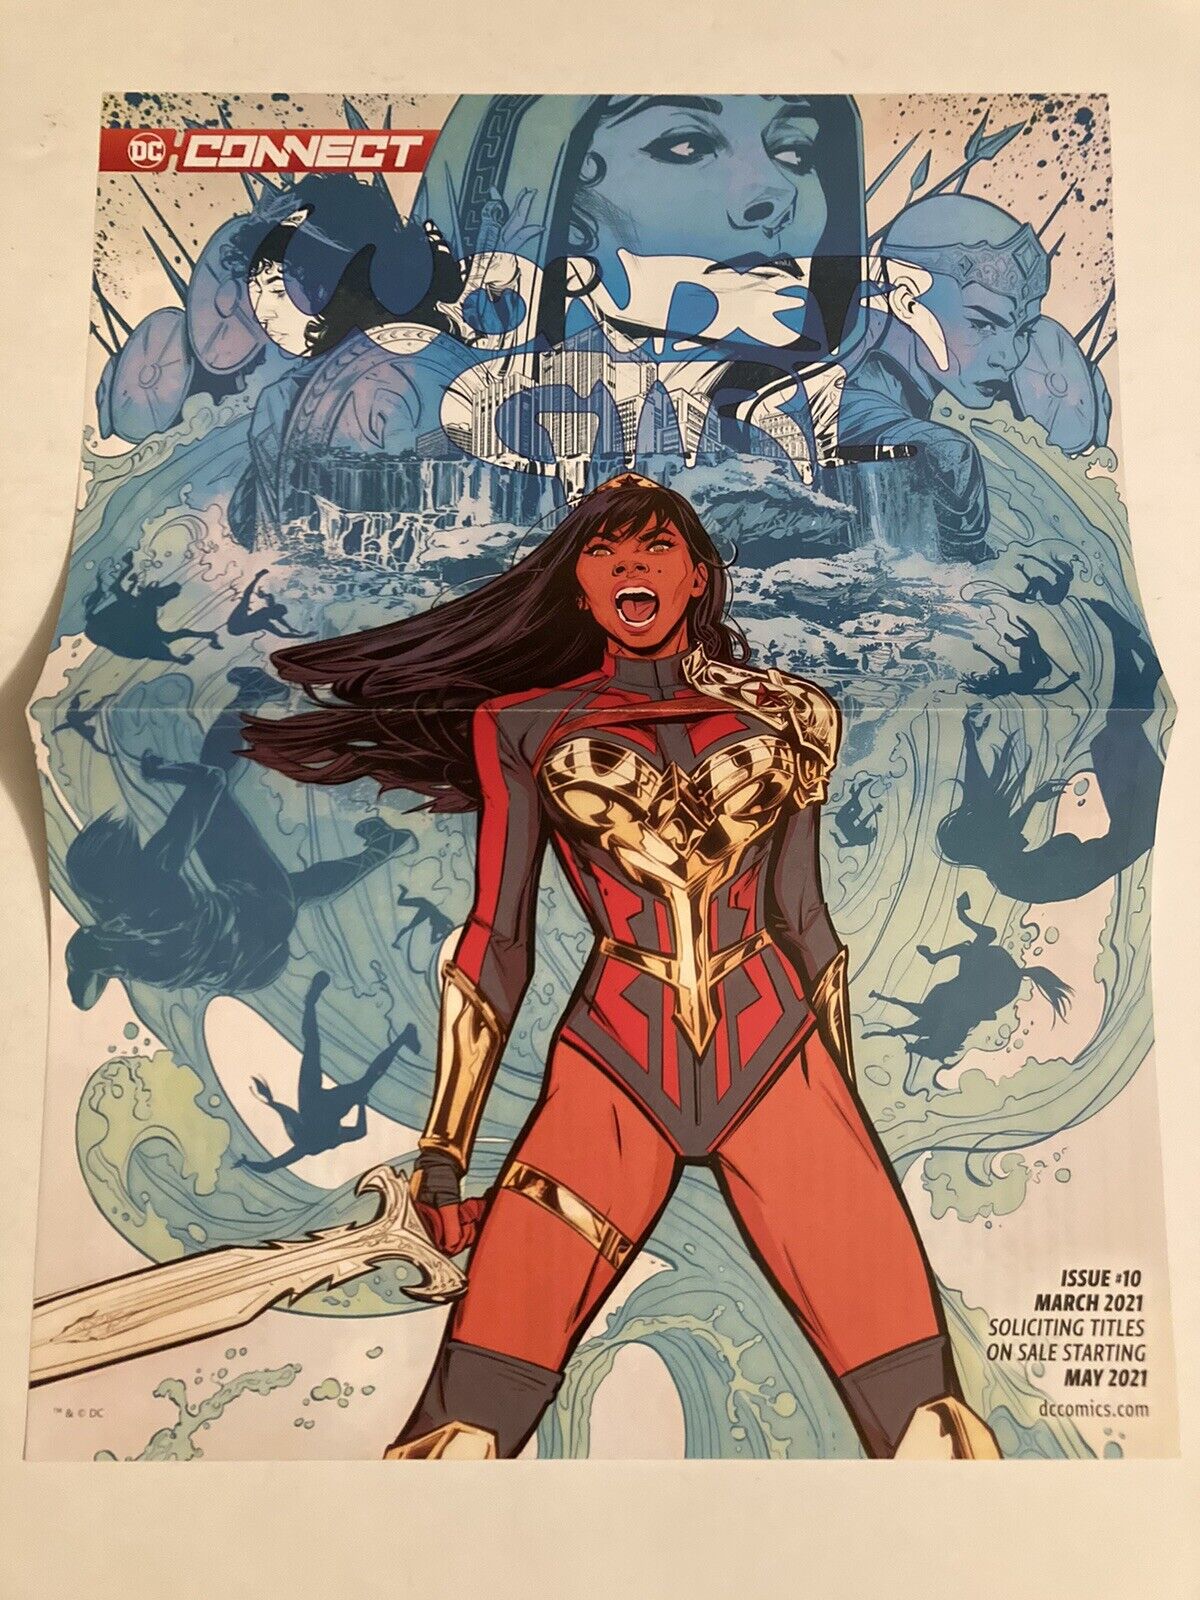 DC Connect Issue #10 March 2021 Wonder Girl Folded Poster